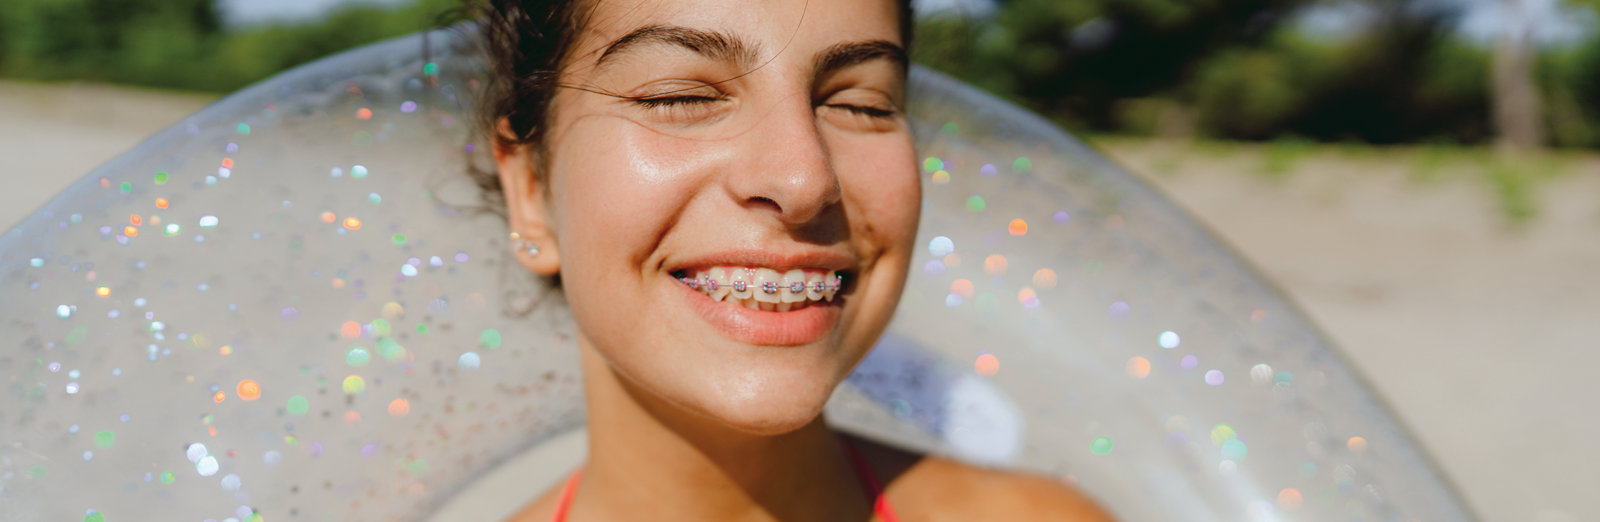 girl-with-braces-smiling-1600x522.png